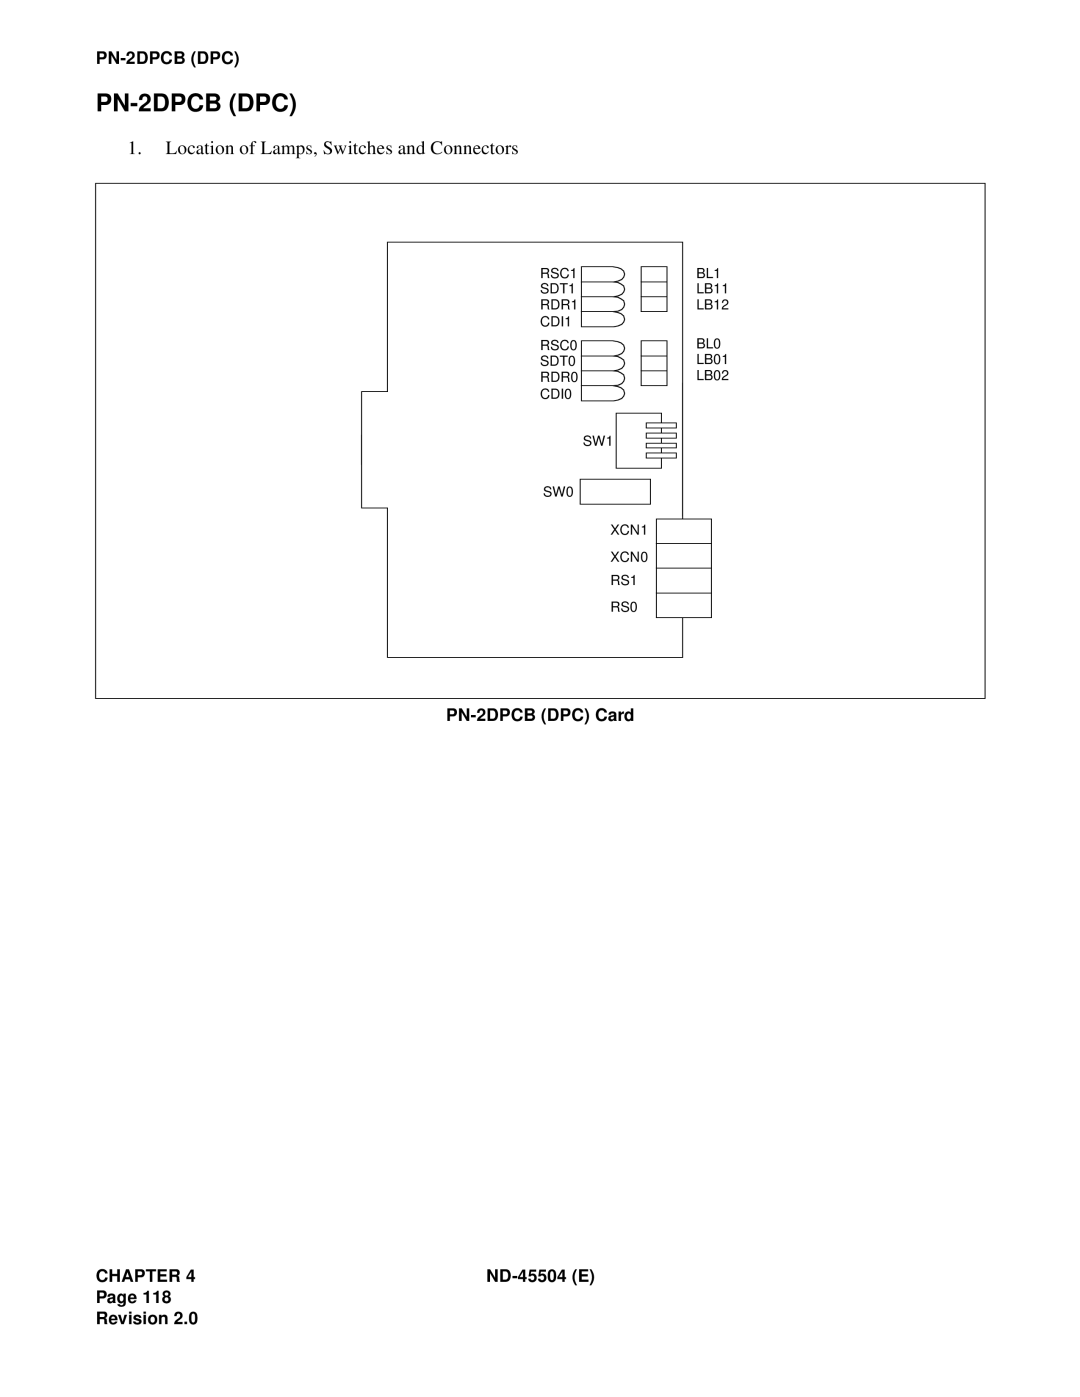 NEC 2000 IVS manual PN-2DPCBDPC, Location of Lamps, Switches and Connectors 